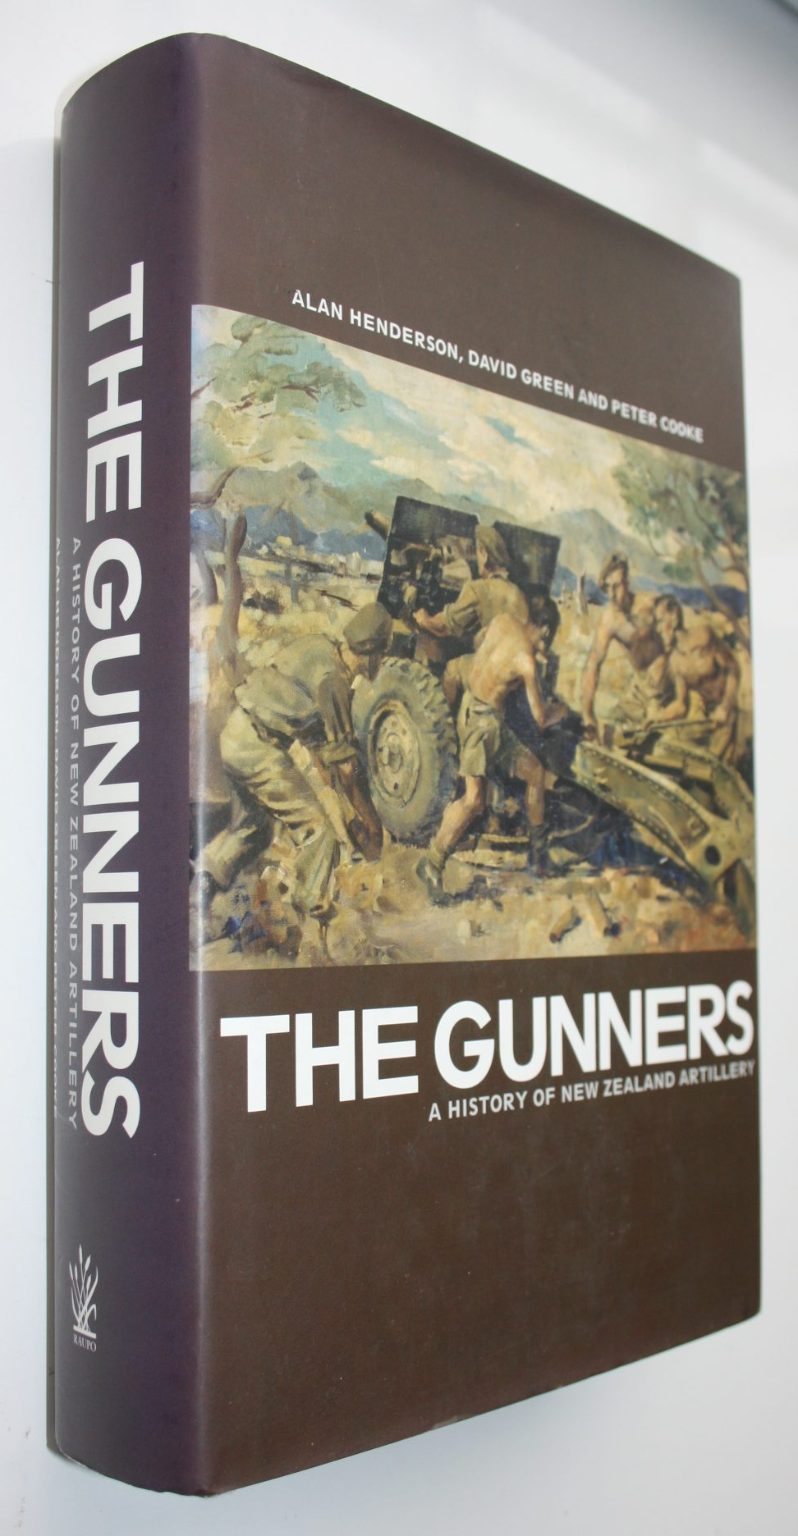 The Gunners History of the Royal NZ Artillery Corps By Alan Henderson, David Green, Peter Cooke.